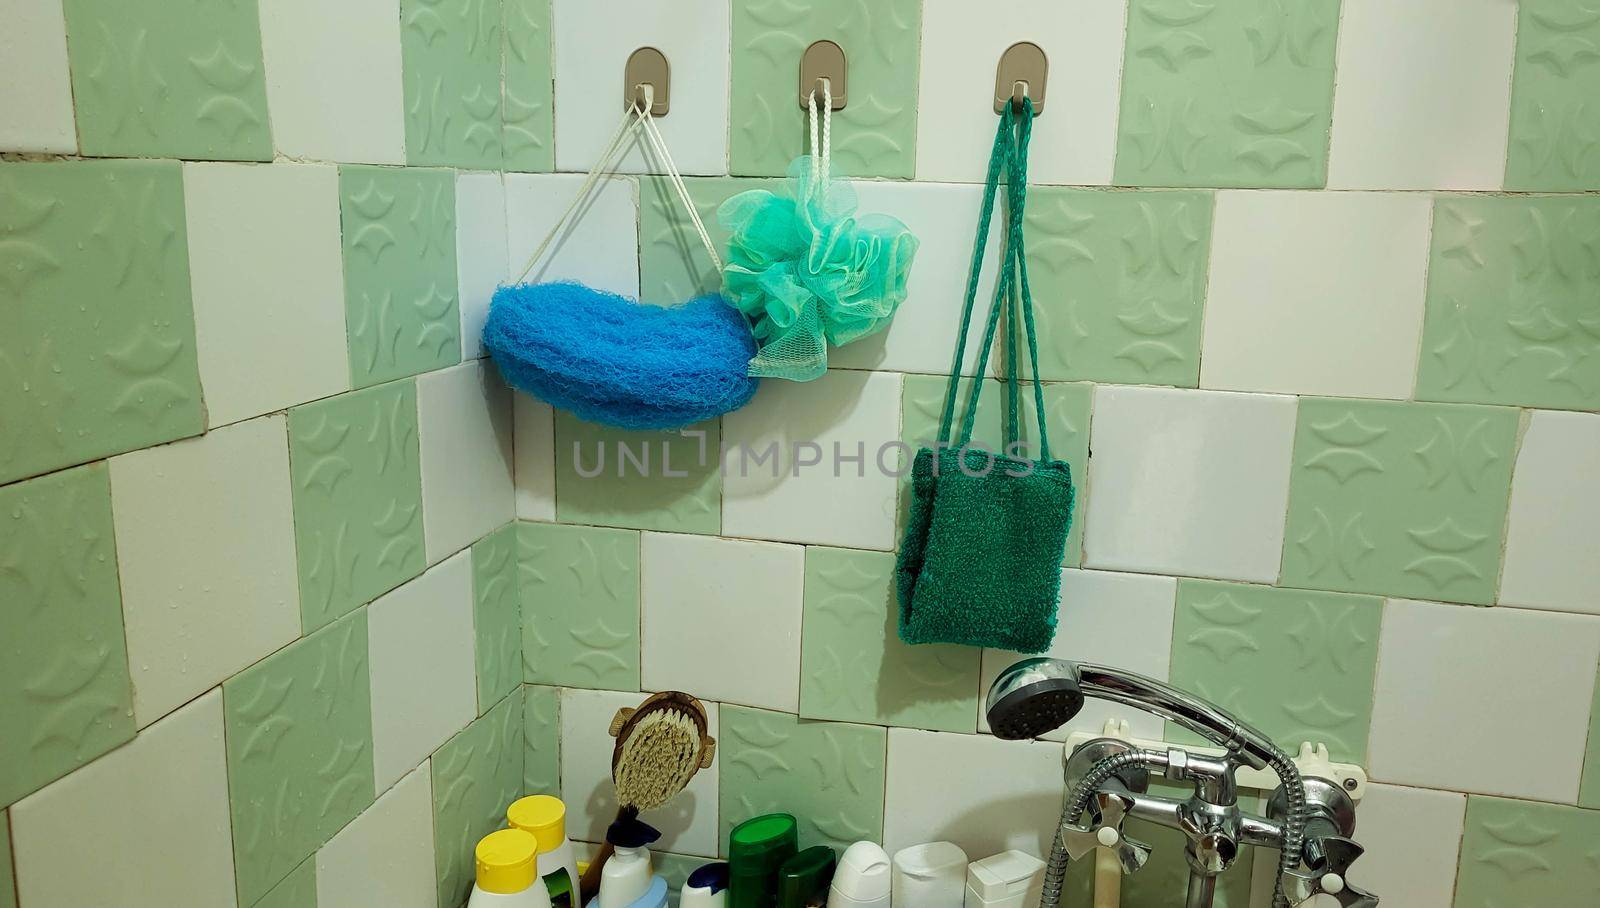 Synthetic washcloths for body care hang on the wall in the bathroom by lapushka62